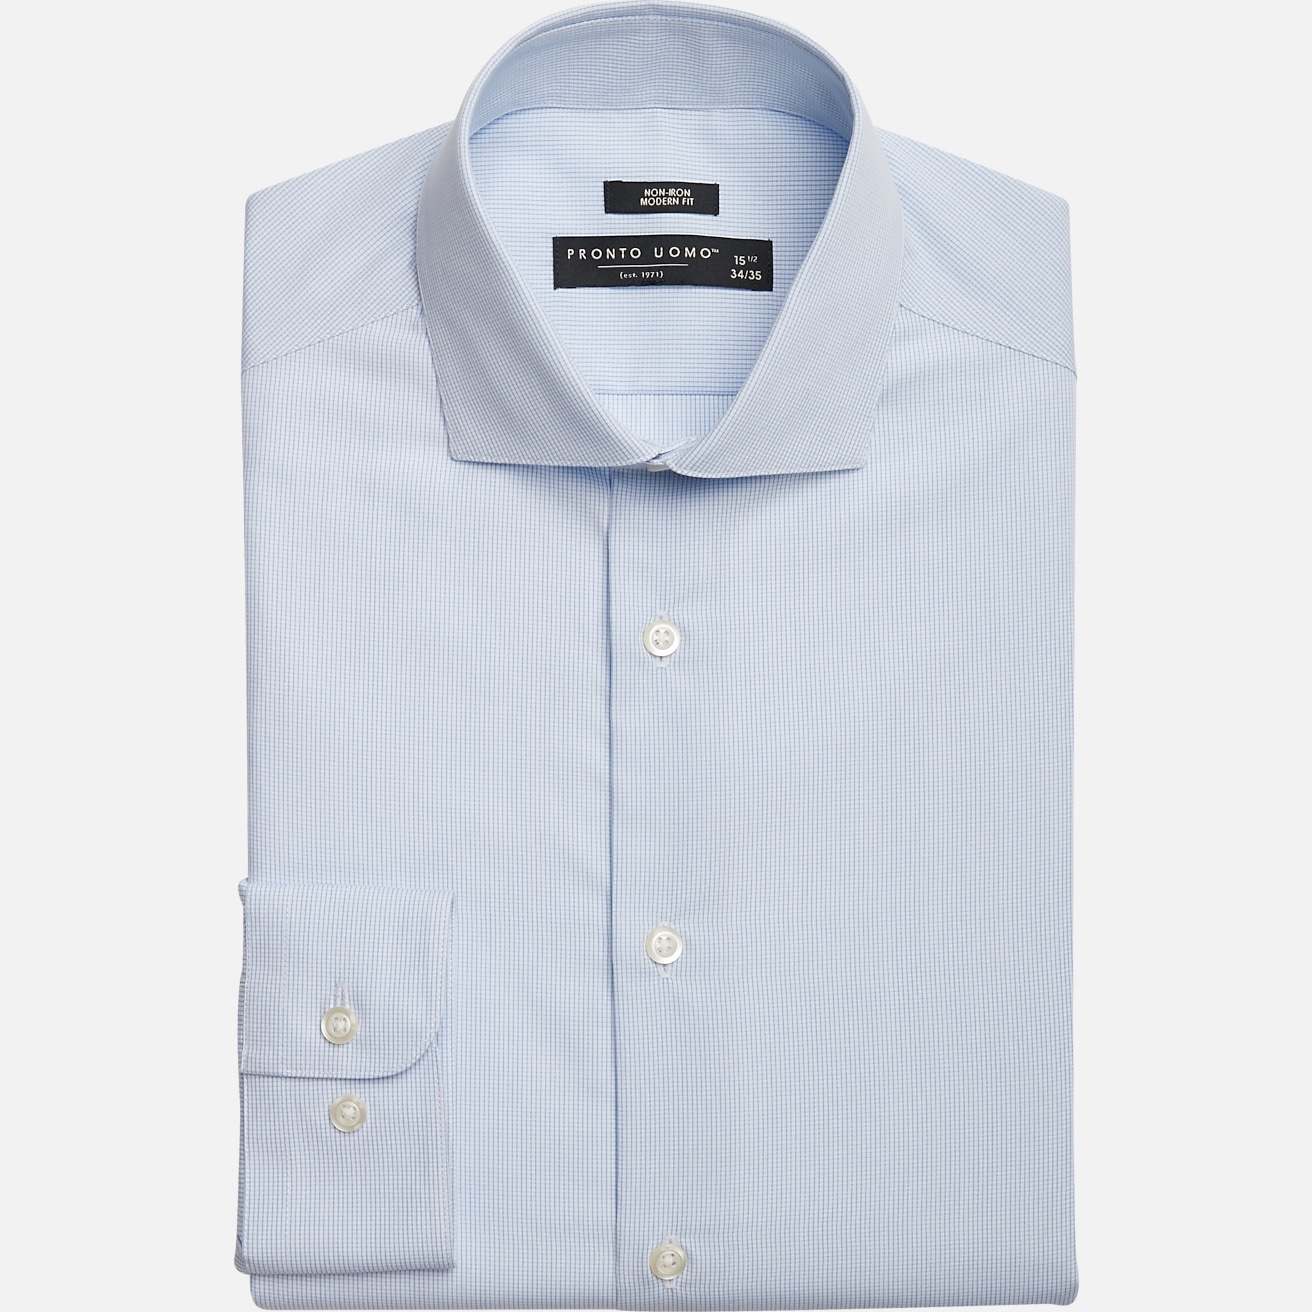 PRONTO UOMO MODERN FIT BLUE MICRO GINGHAM SPREAD CLLR DS